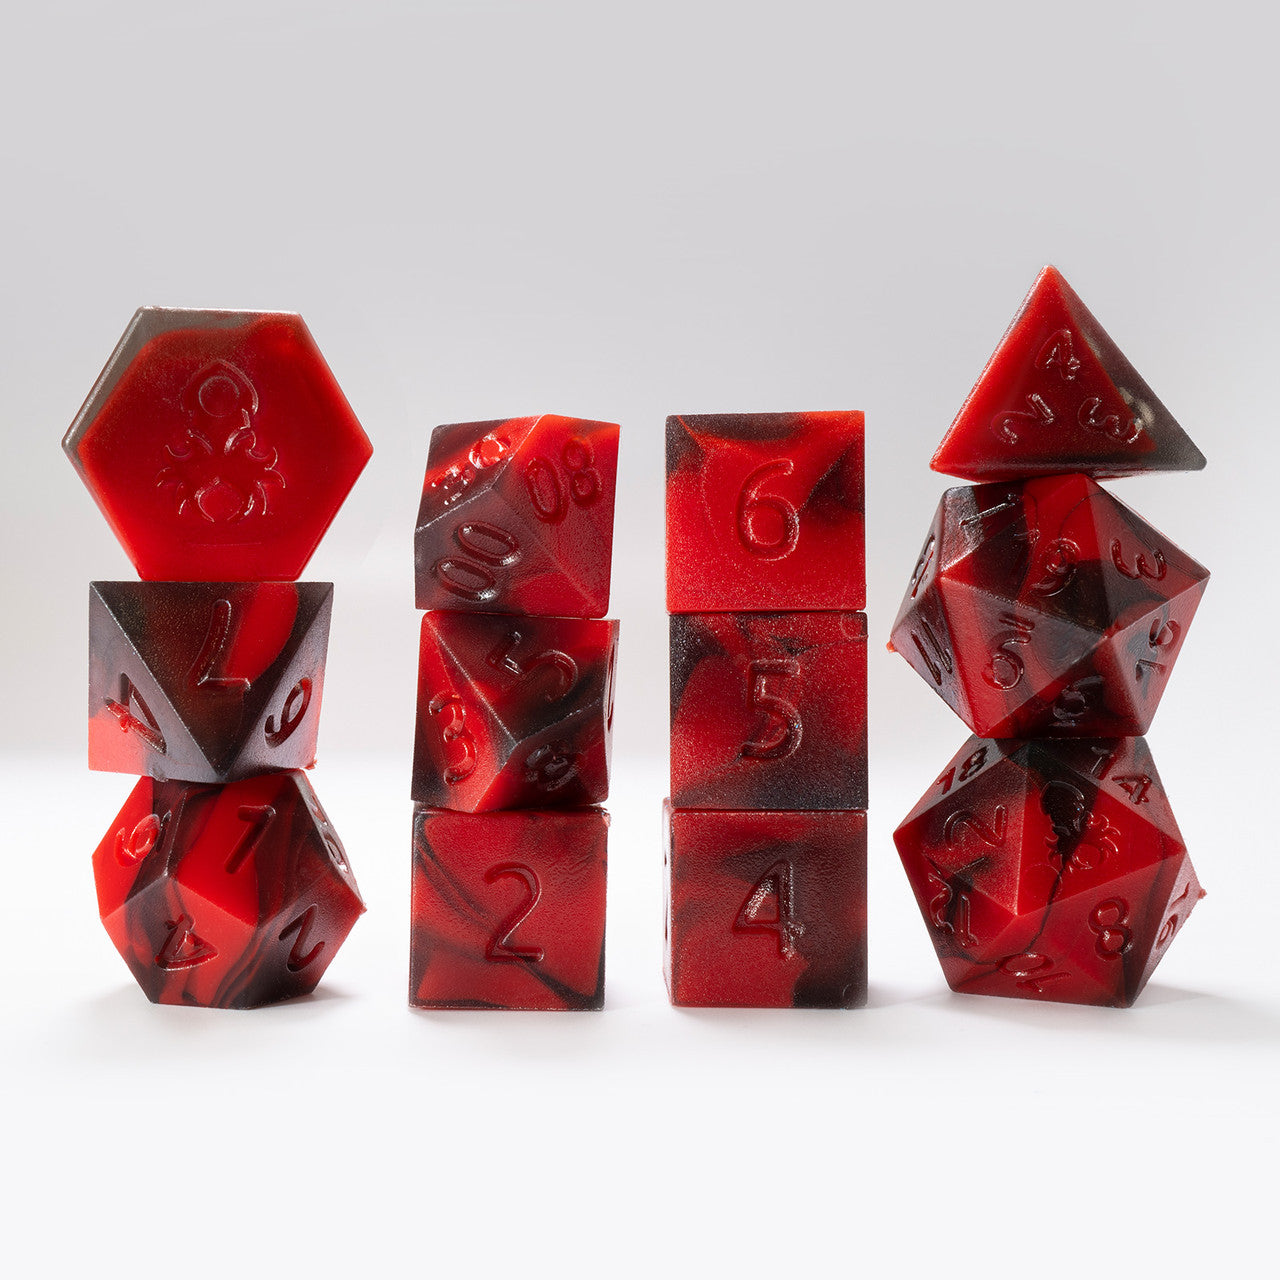 RAW 12pc Red and Black Gummi Polyhedral Dice Set